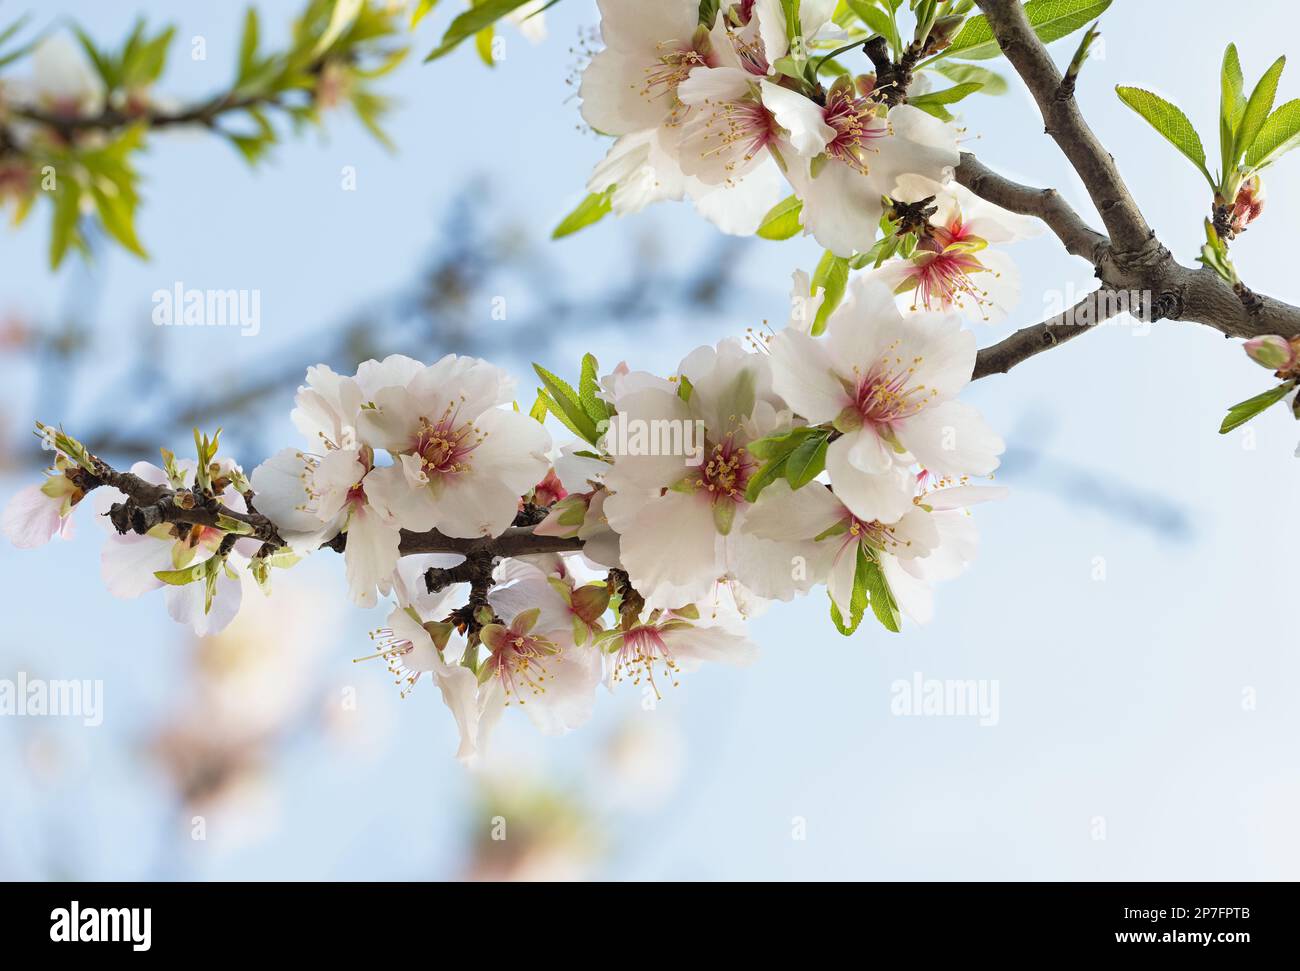 Closeup of beautiful white pink flowers of a blossoming almond tree in an almond garden orchard in Northern Israel Stock Photo